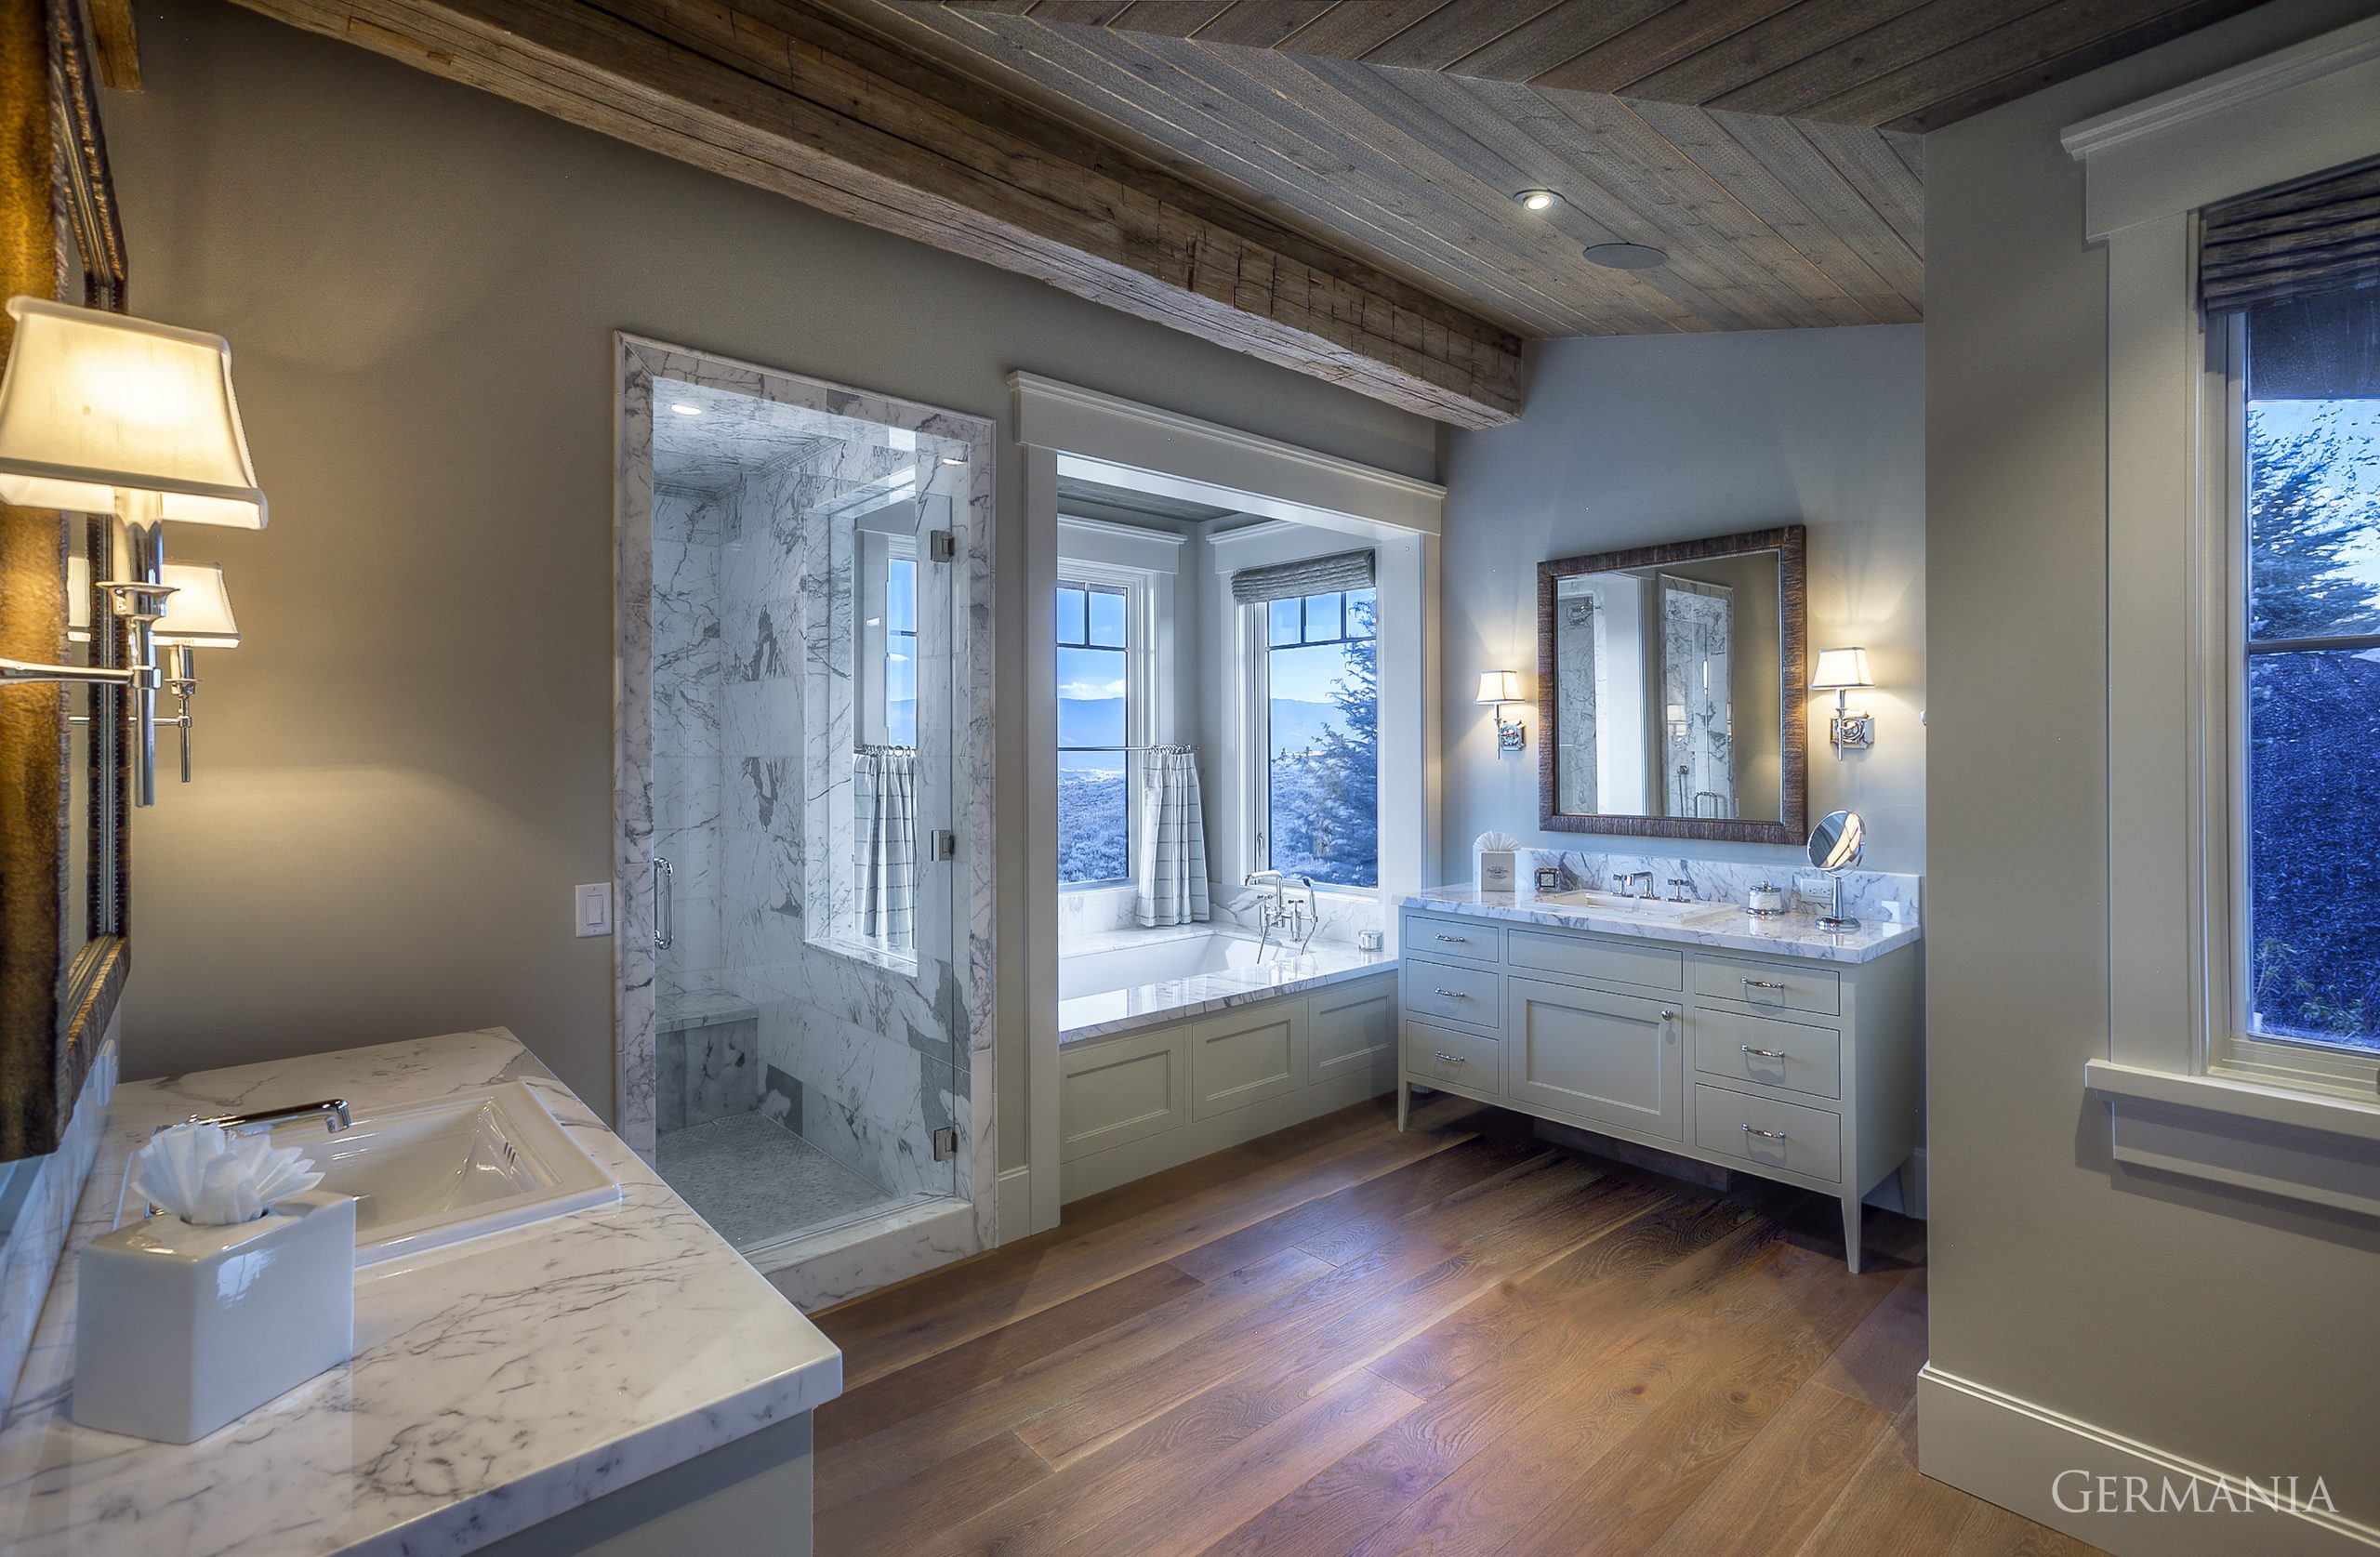 With this custom house bathroom design, Germania Construction emphasied the importance of the bathtub, shower, and tongue and groove ceiling complementing each other. Luxurious views require luxury homes.